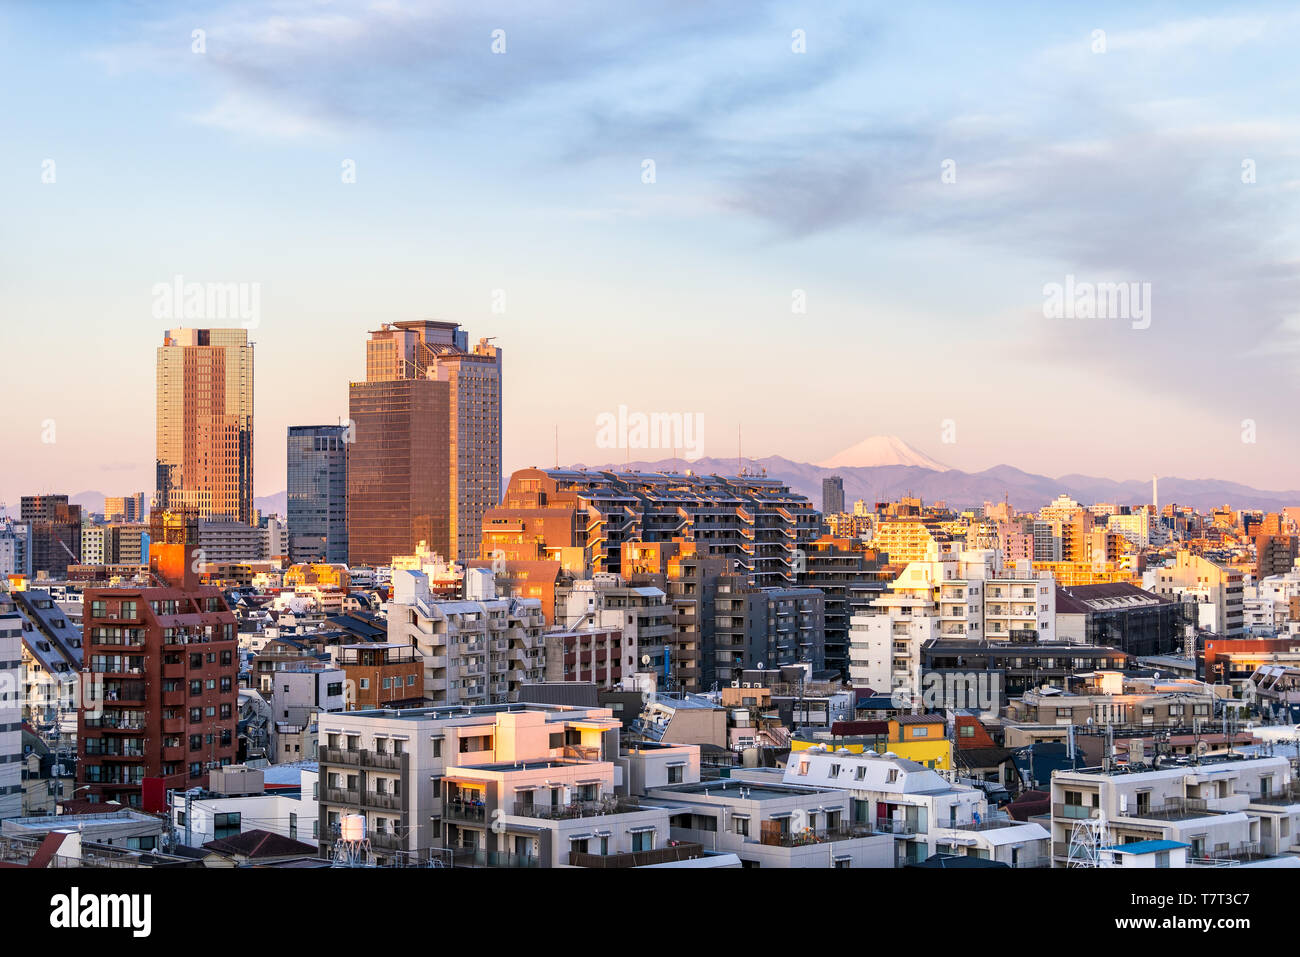 Tokyo, Japan - March 31, 2019: Shinjuku cityscape at sunset with view of Mount Fuji and golden sunlight with apartment buildings and mountains Stock Photo